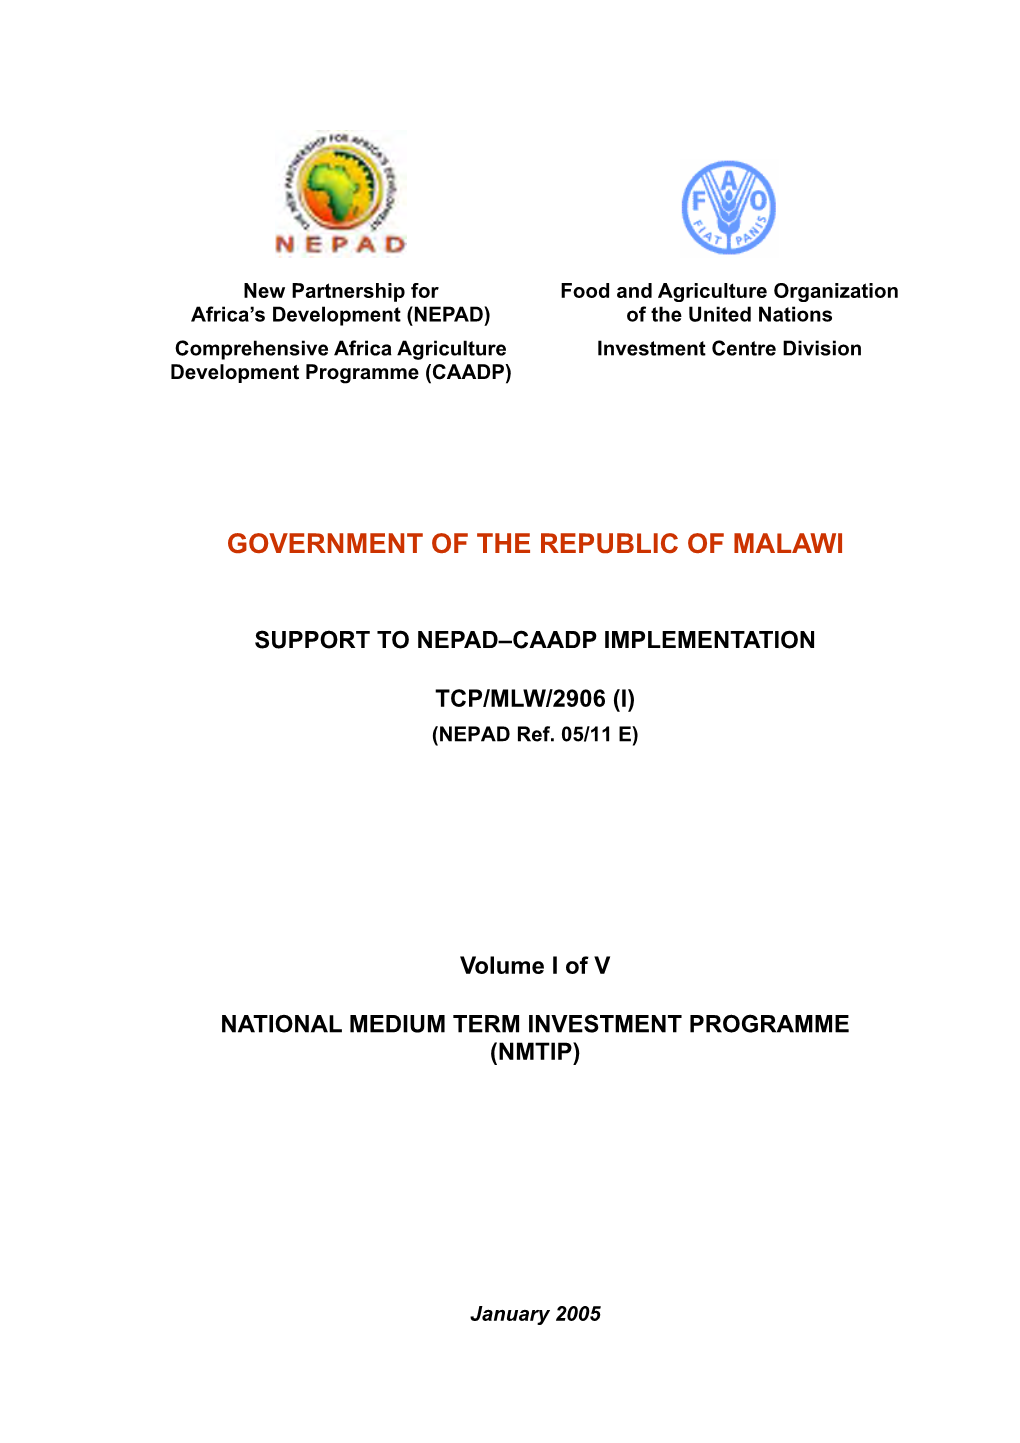 Government of the Republic of Malawi